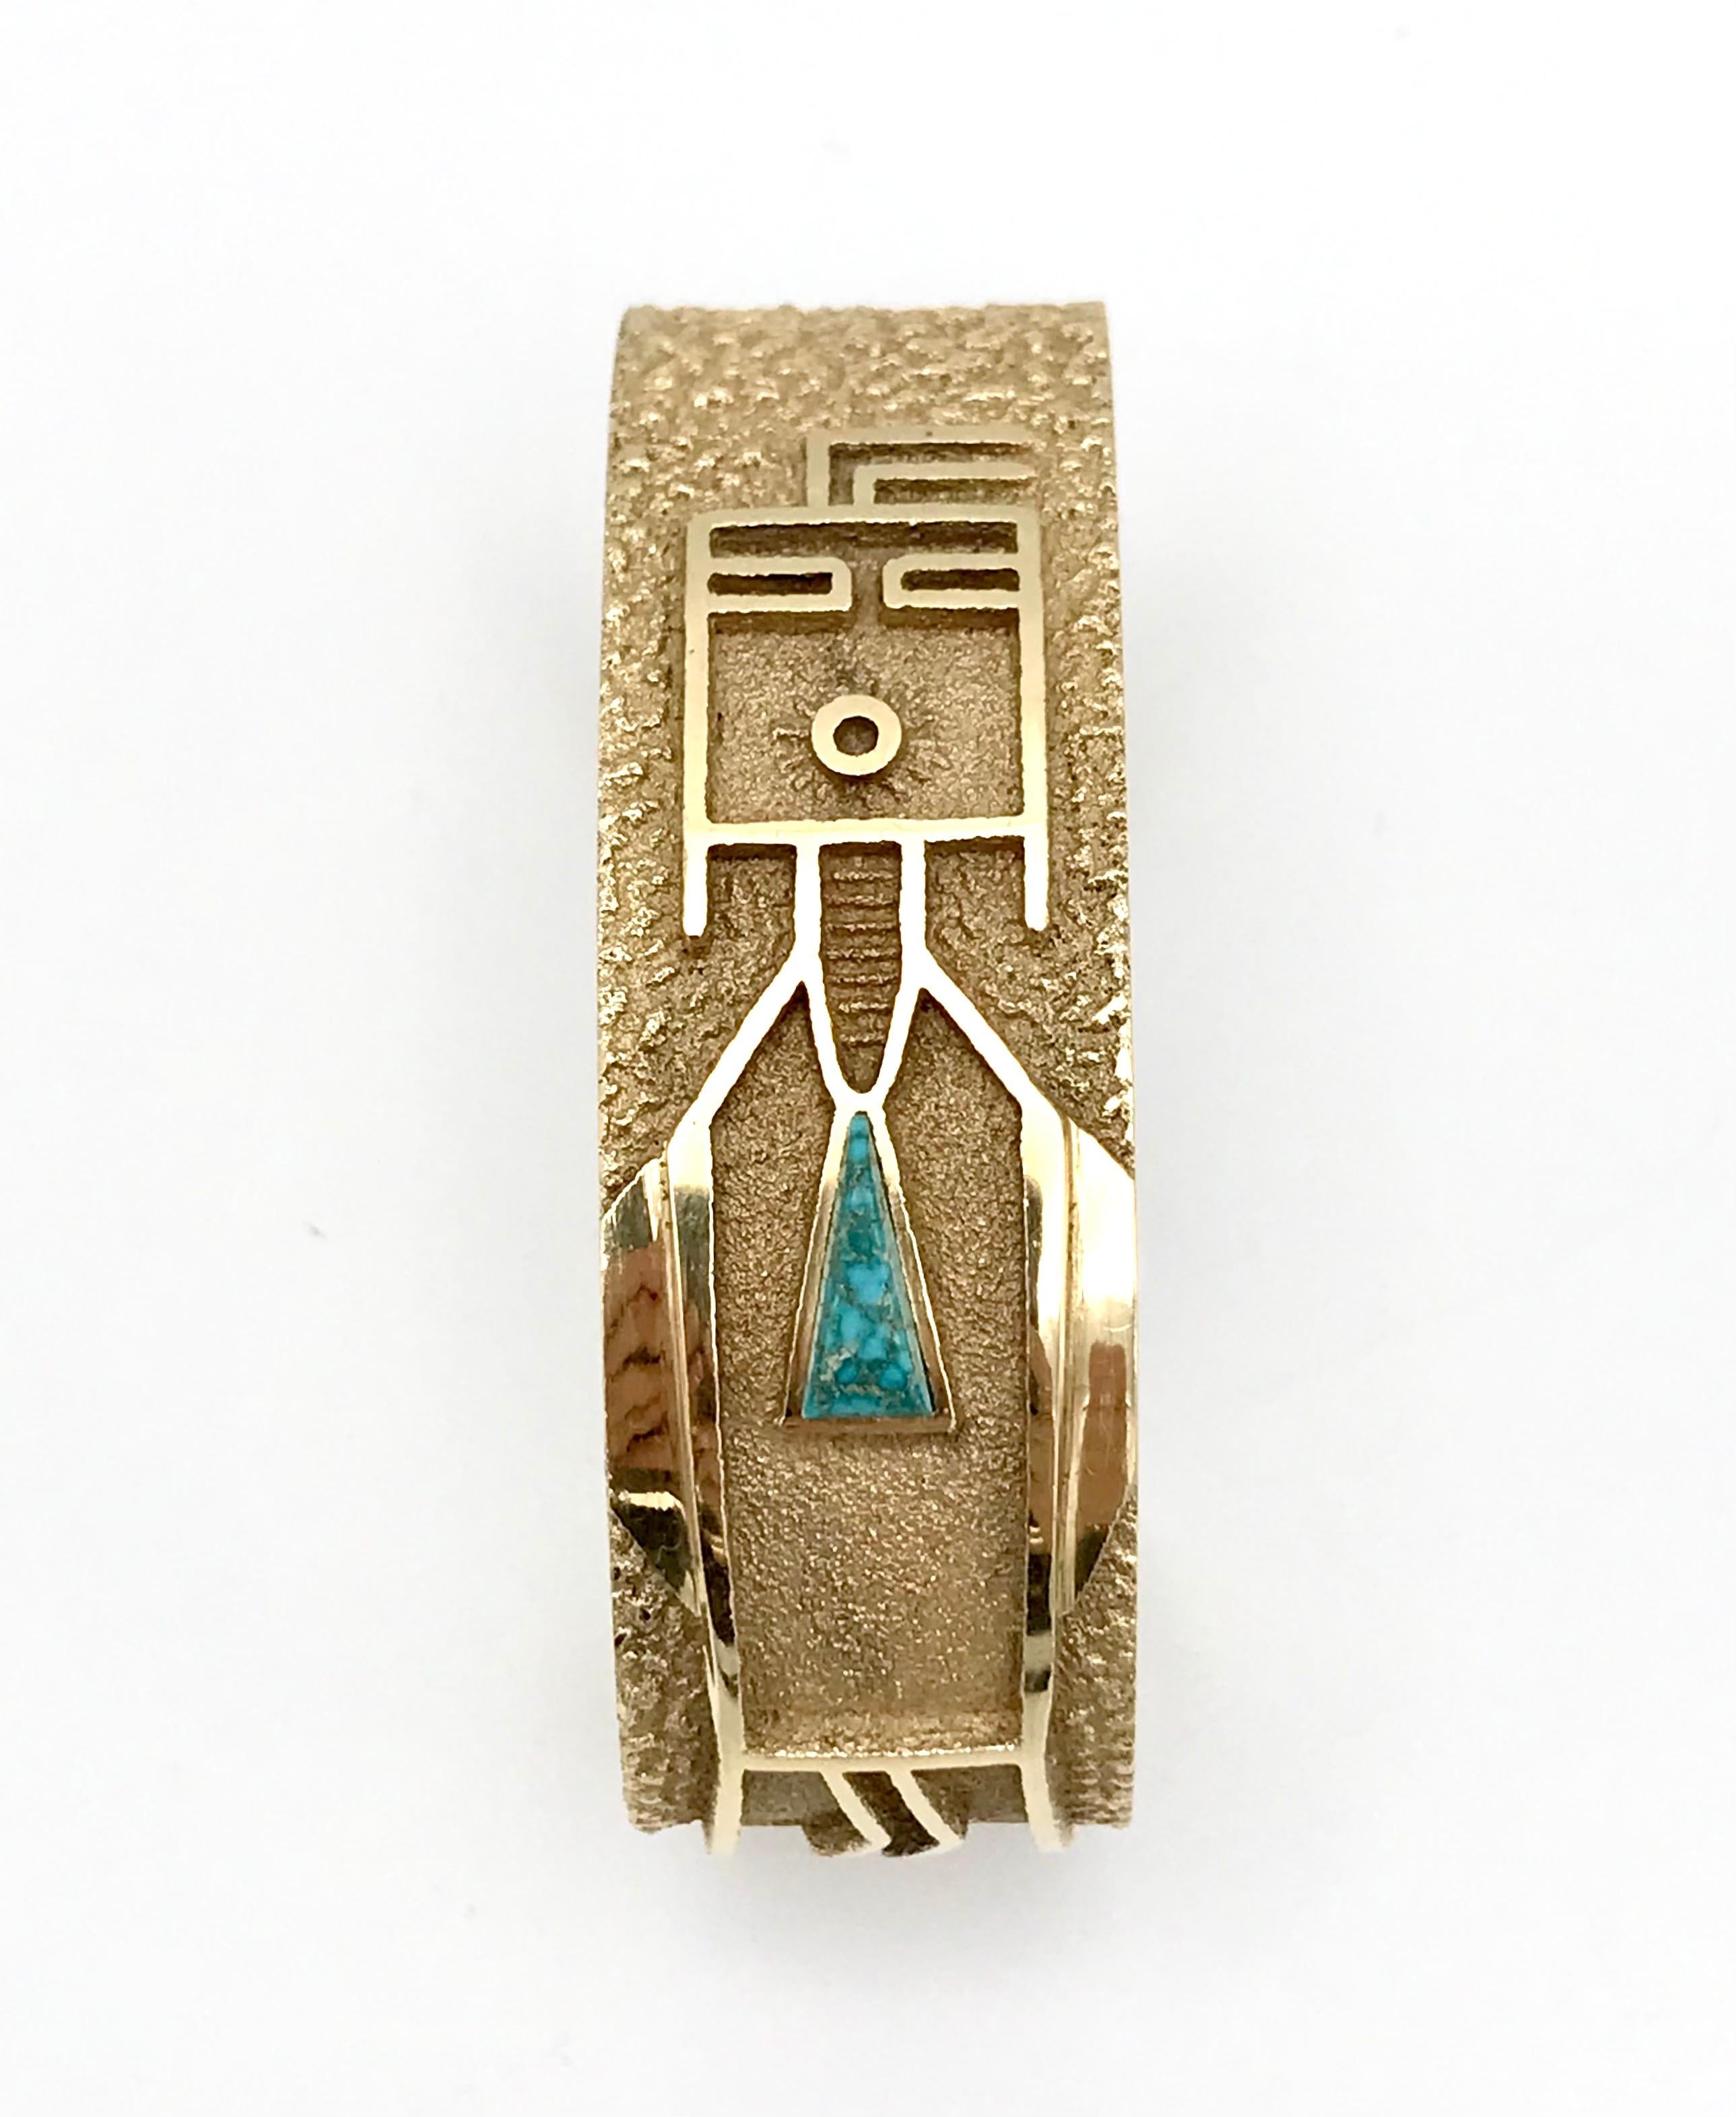 14k yellow gold tufa cast cuff bracelet by Navajo jewelry artist Al Nez. Features high quality turquoise. 
Stamped with Al Nez maker's mark and a hallmark for 14k gold. 
Measurements: inner circumference is 5 1/4